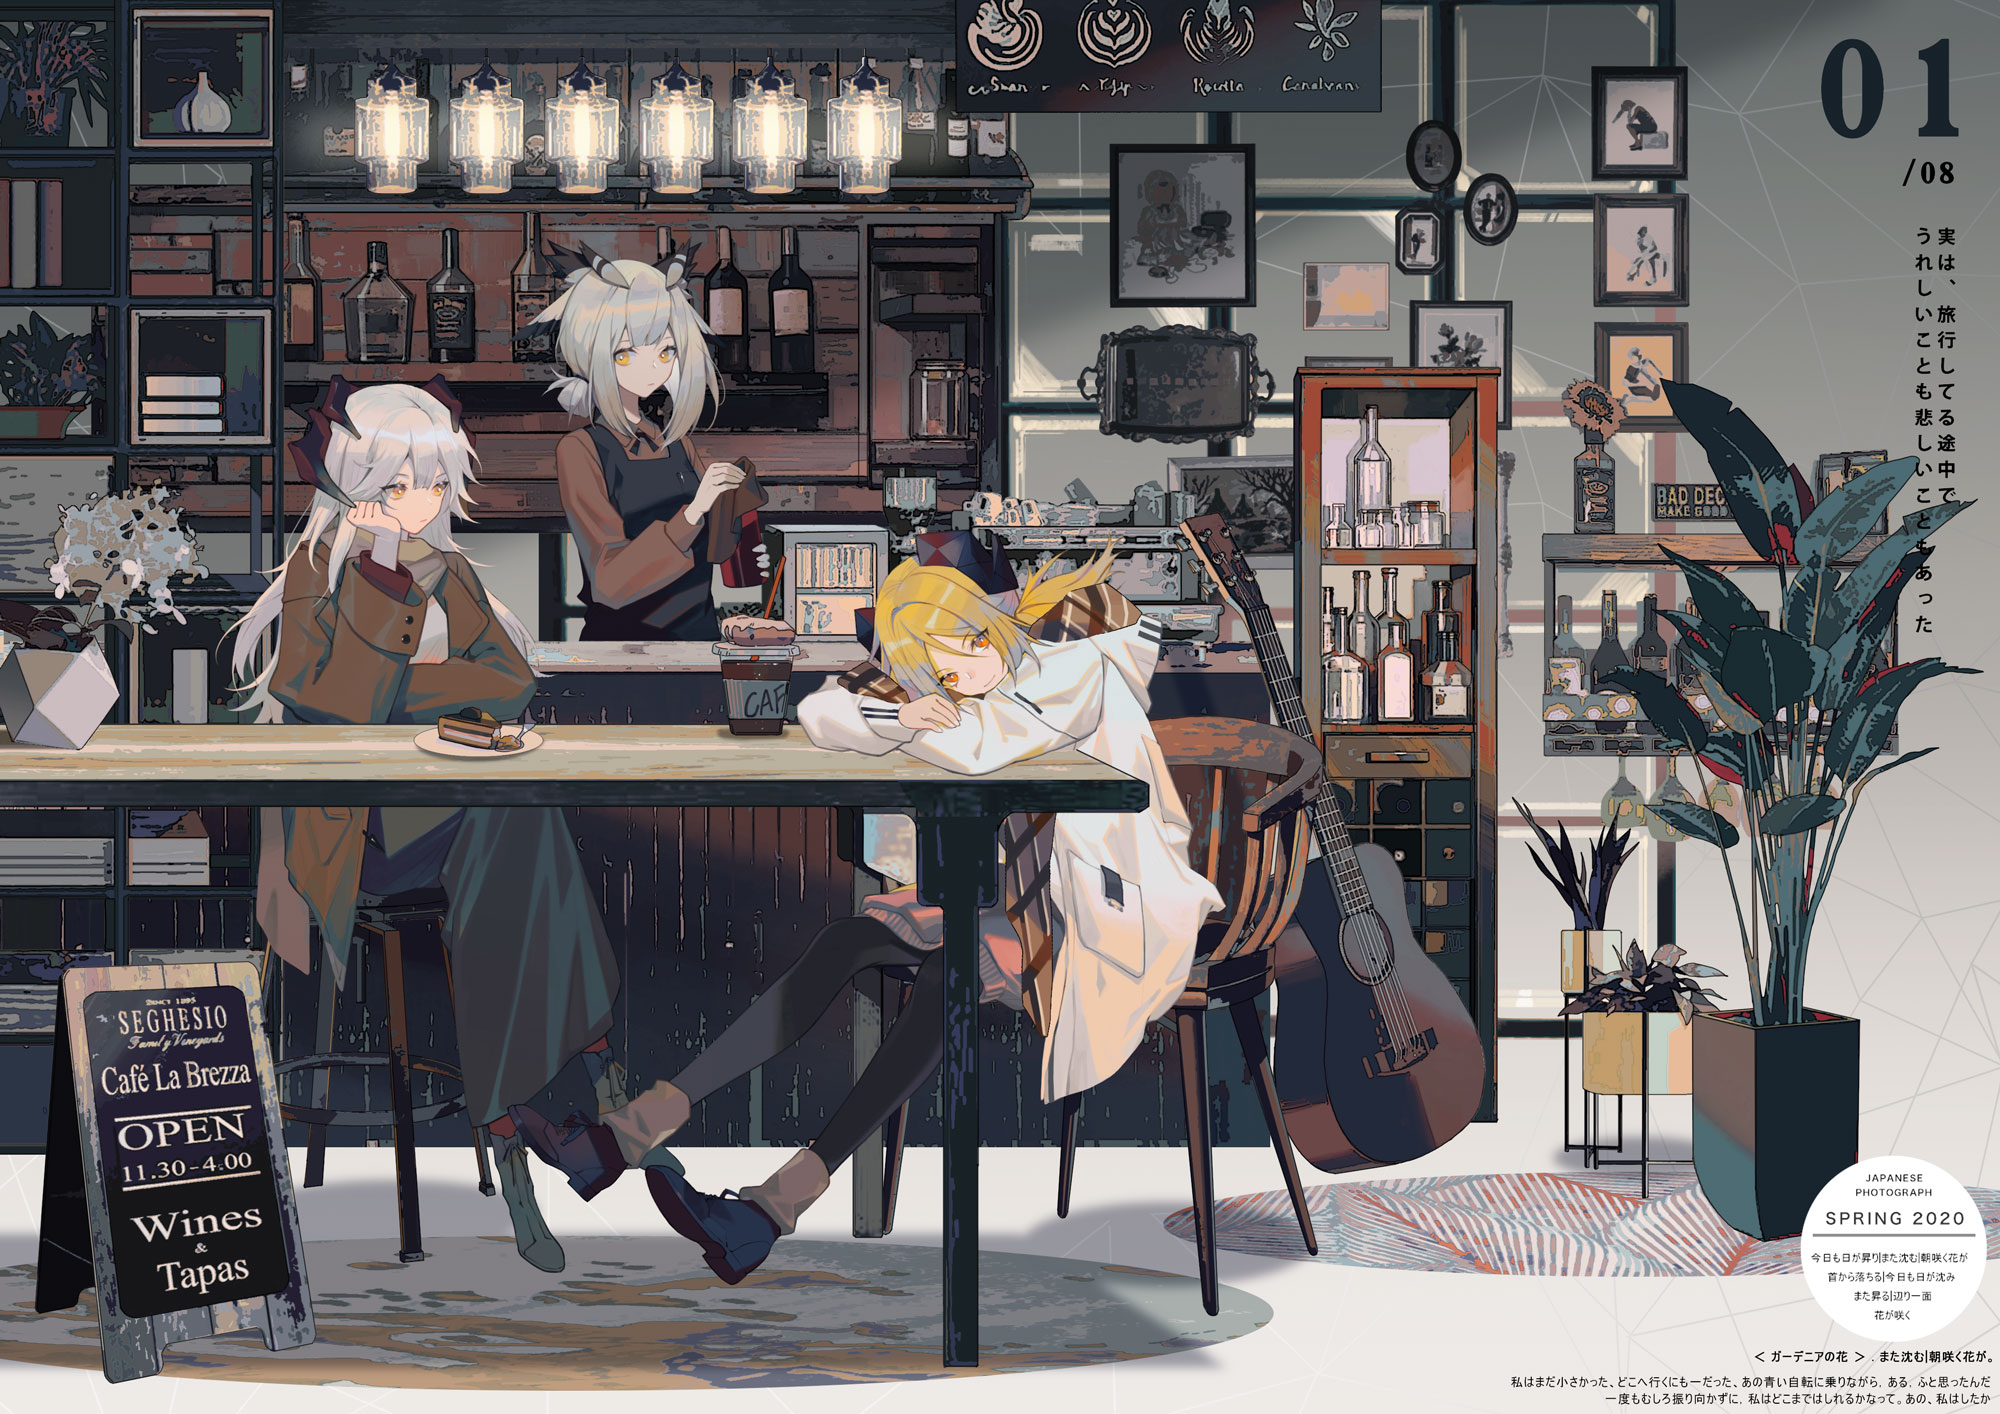 Anime 2000x1414 Arknights anime plants cafe coffee donut cake saria (arknights) Ifrit (Arknights) Ptilopsis(Arknights) pub guitar vases frame bottles carpet table chair social gathering billboards group of women